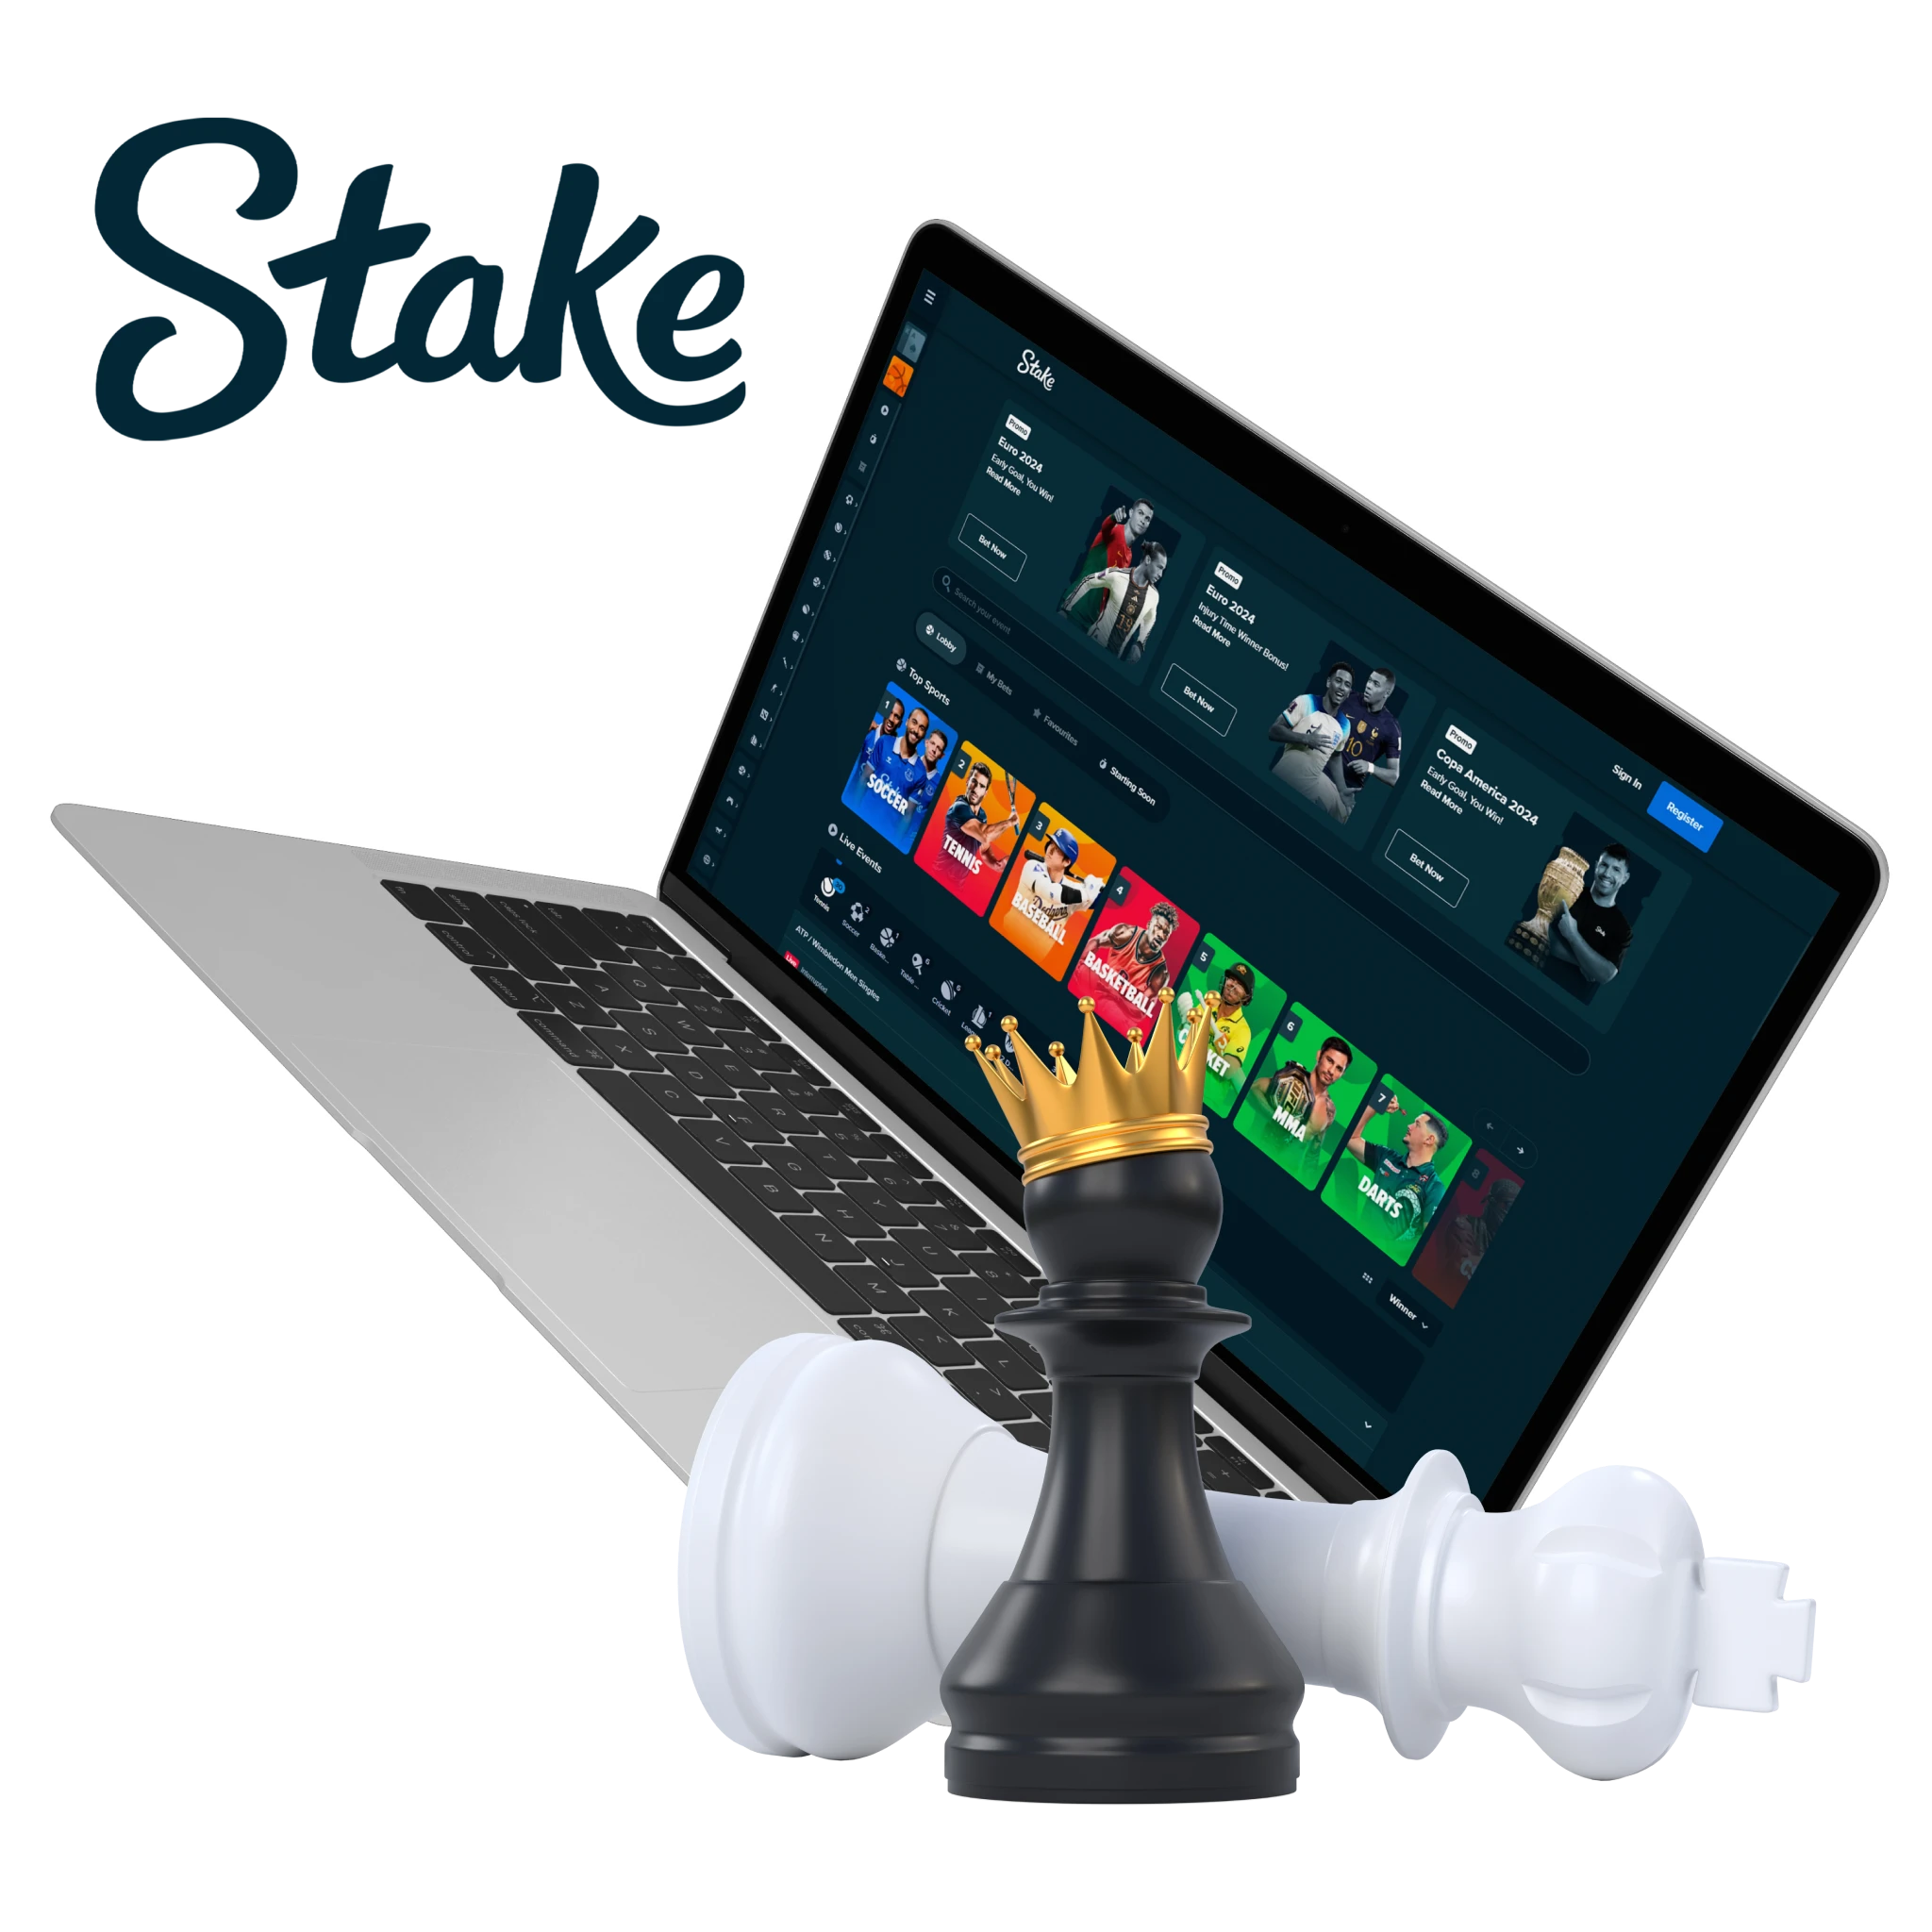 Stake provides all the necessary tools for effective and profitable chess betting.